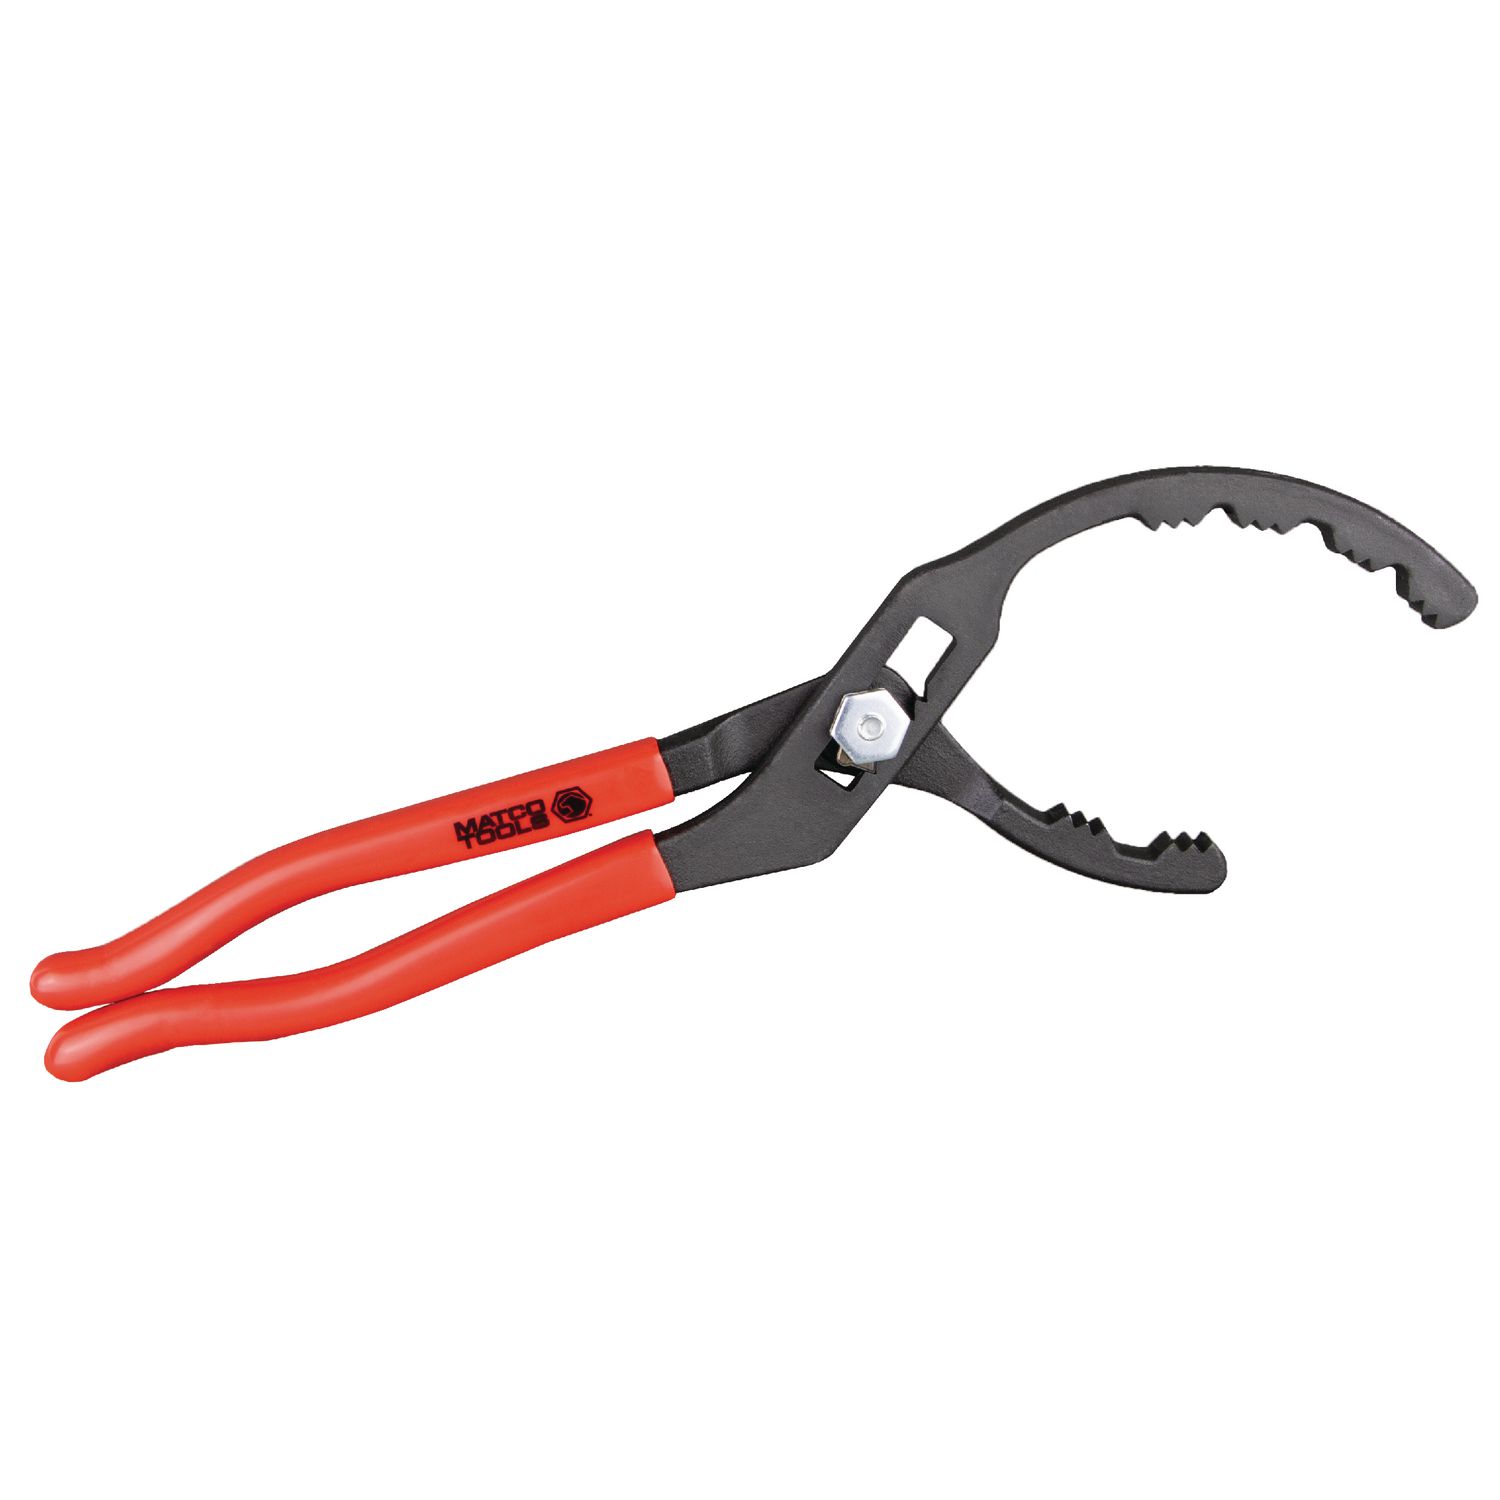 Adjustable Oil Filter Pliers - 4-1/4 - OFH245C